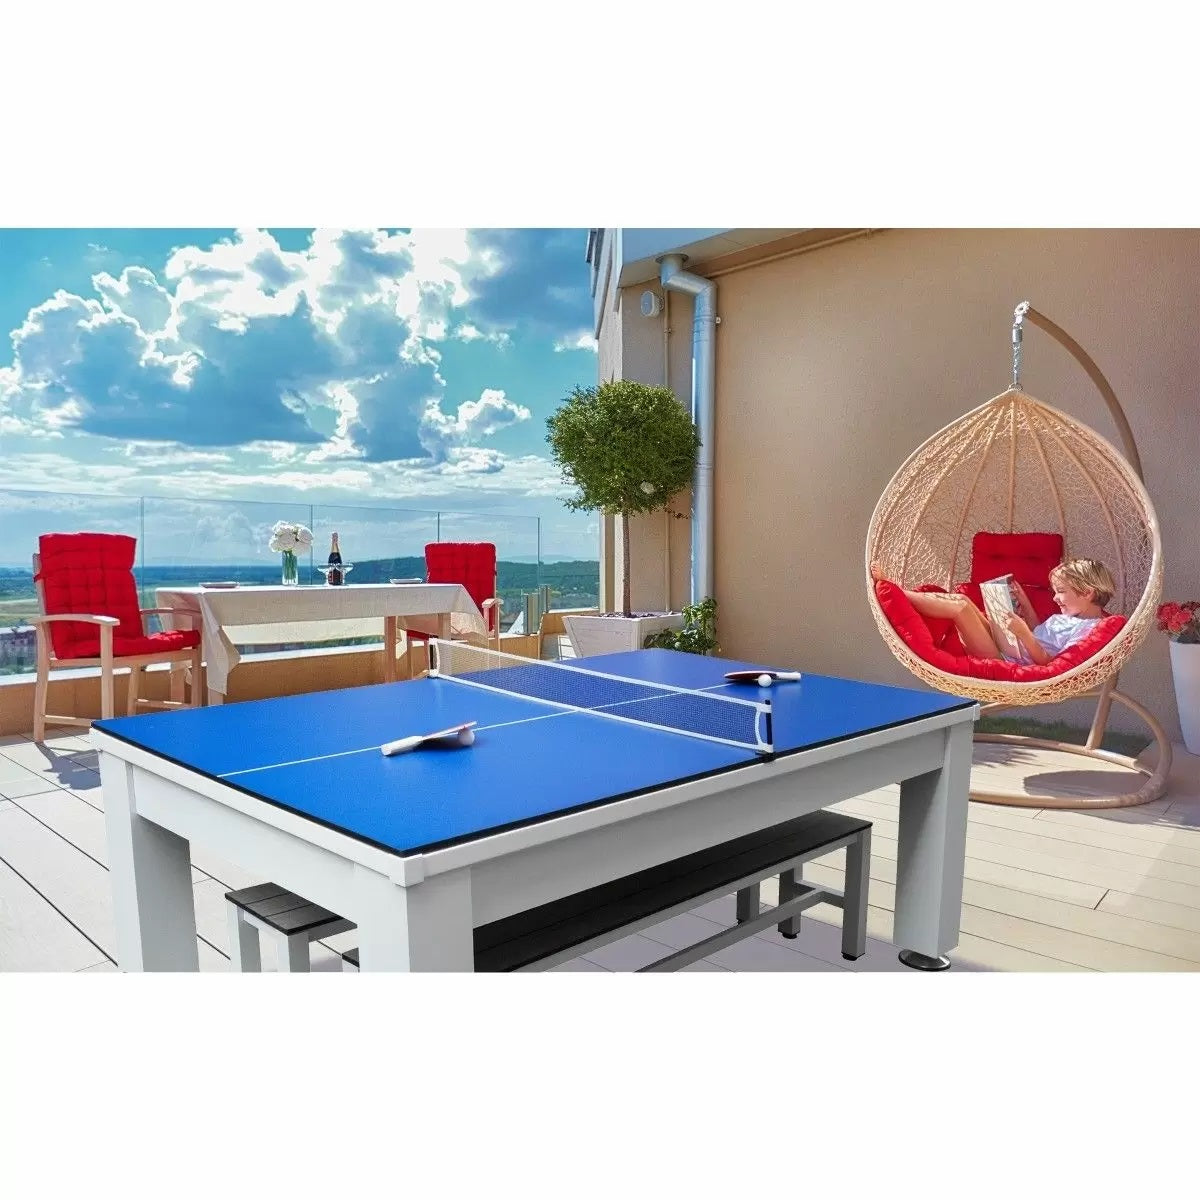 Imperial Esterno Outdoor Table Dining Top and Tennis Table in display